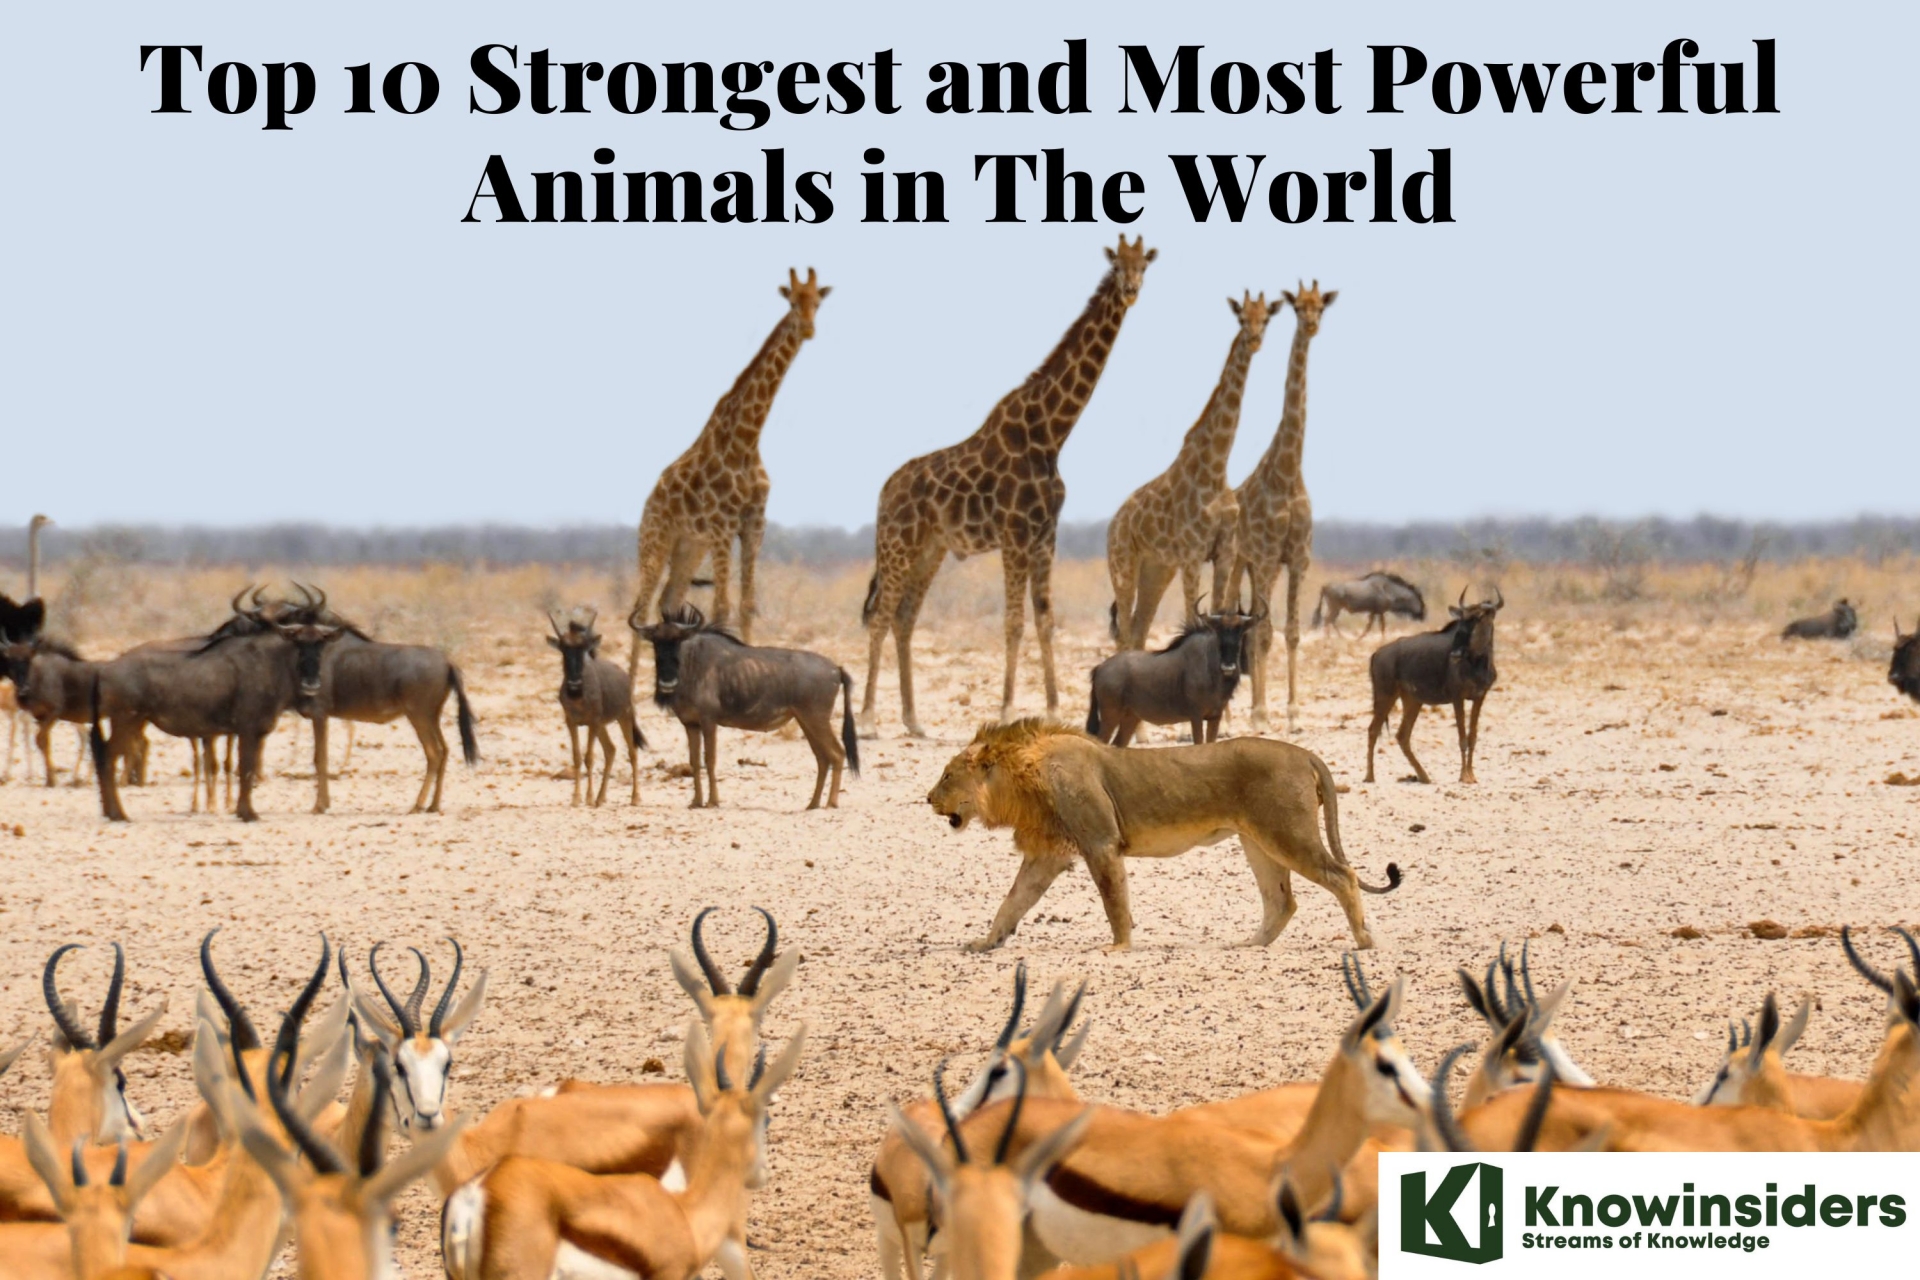 Top 10 Strongest and Most Powerful Animals in The World